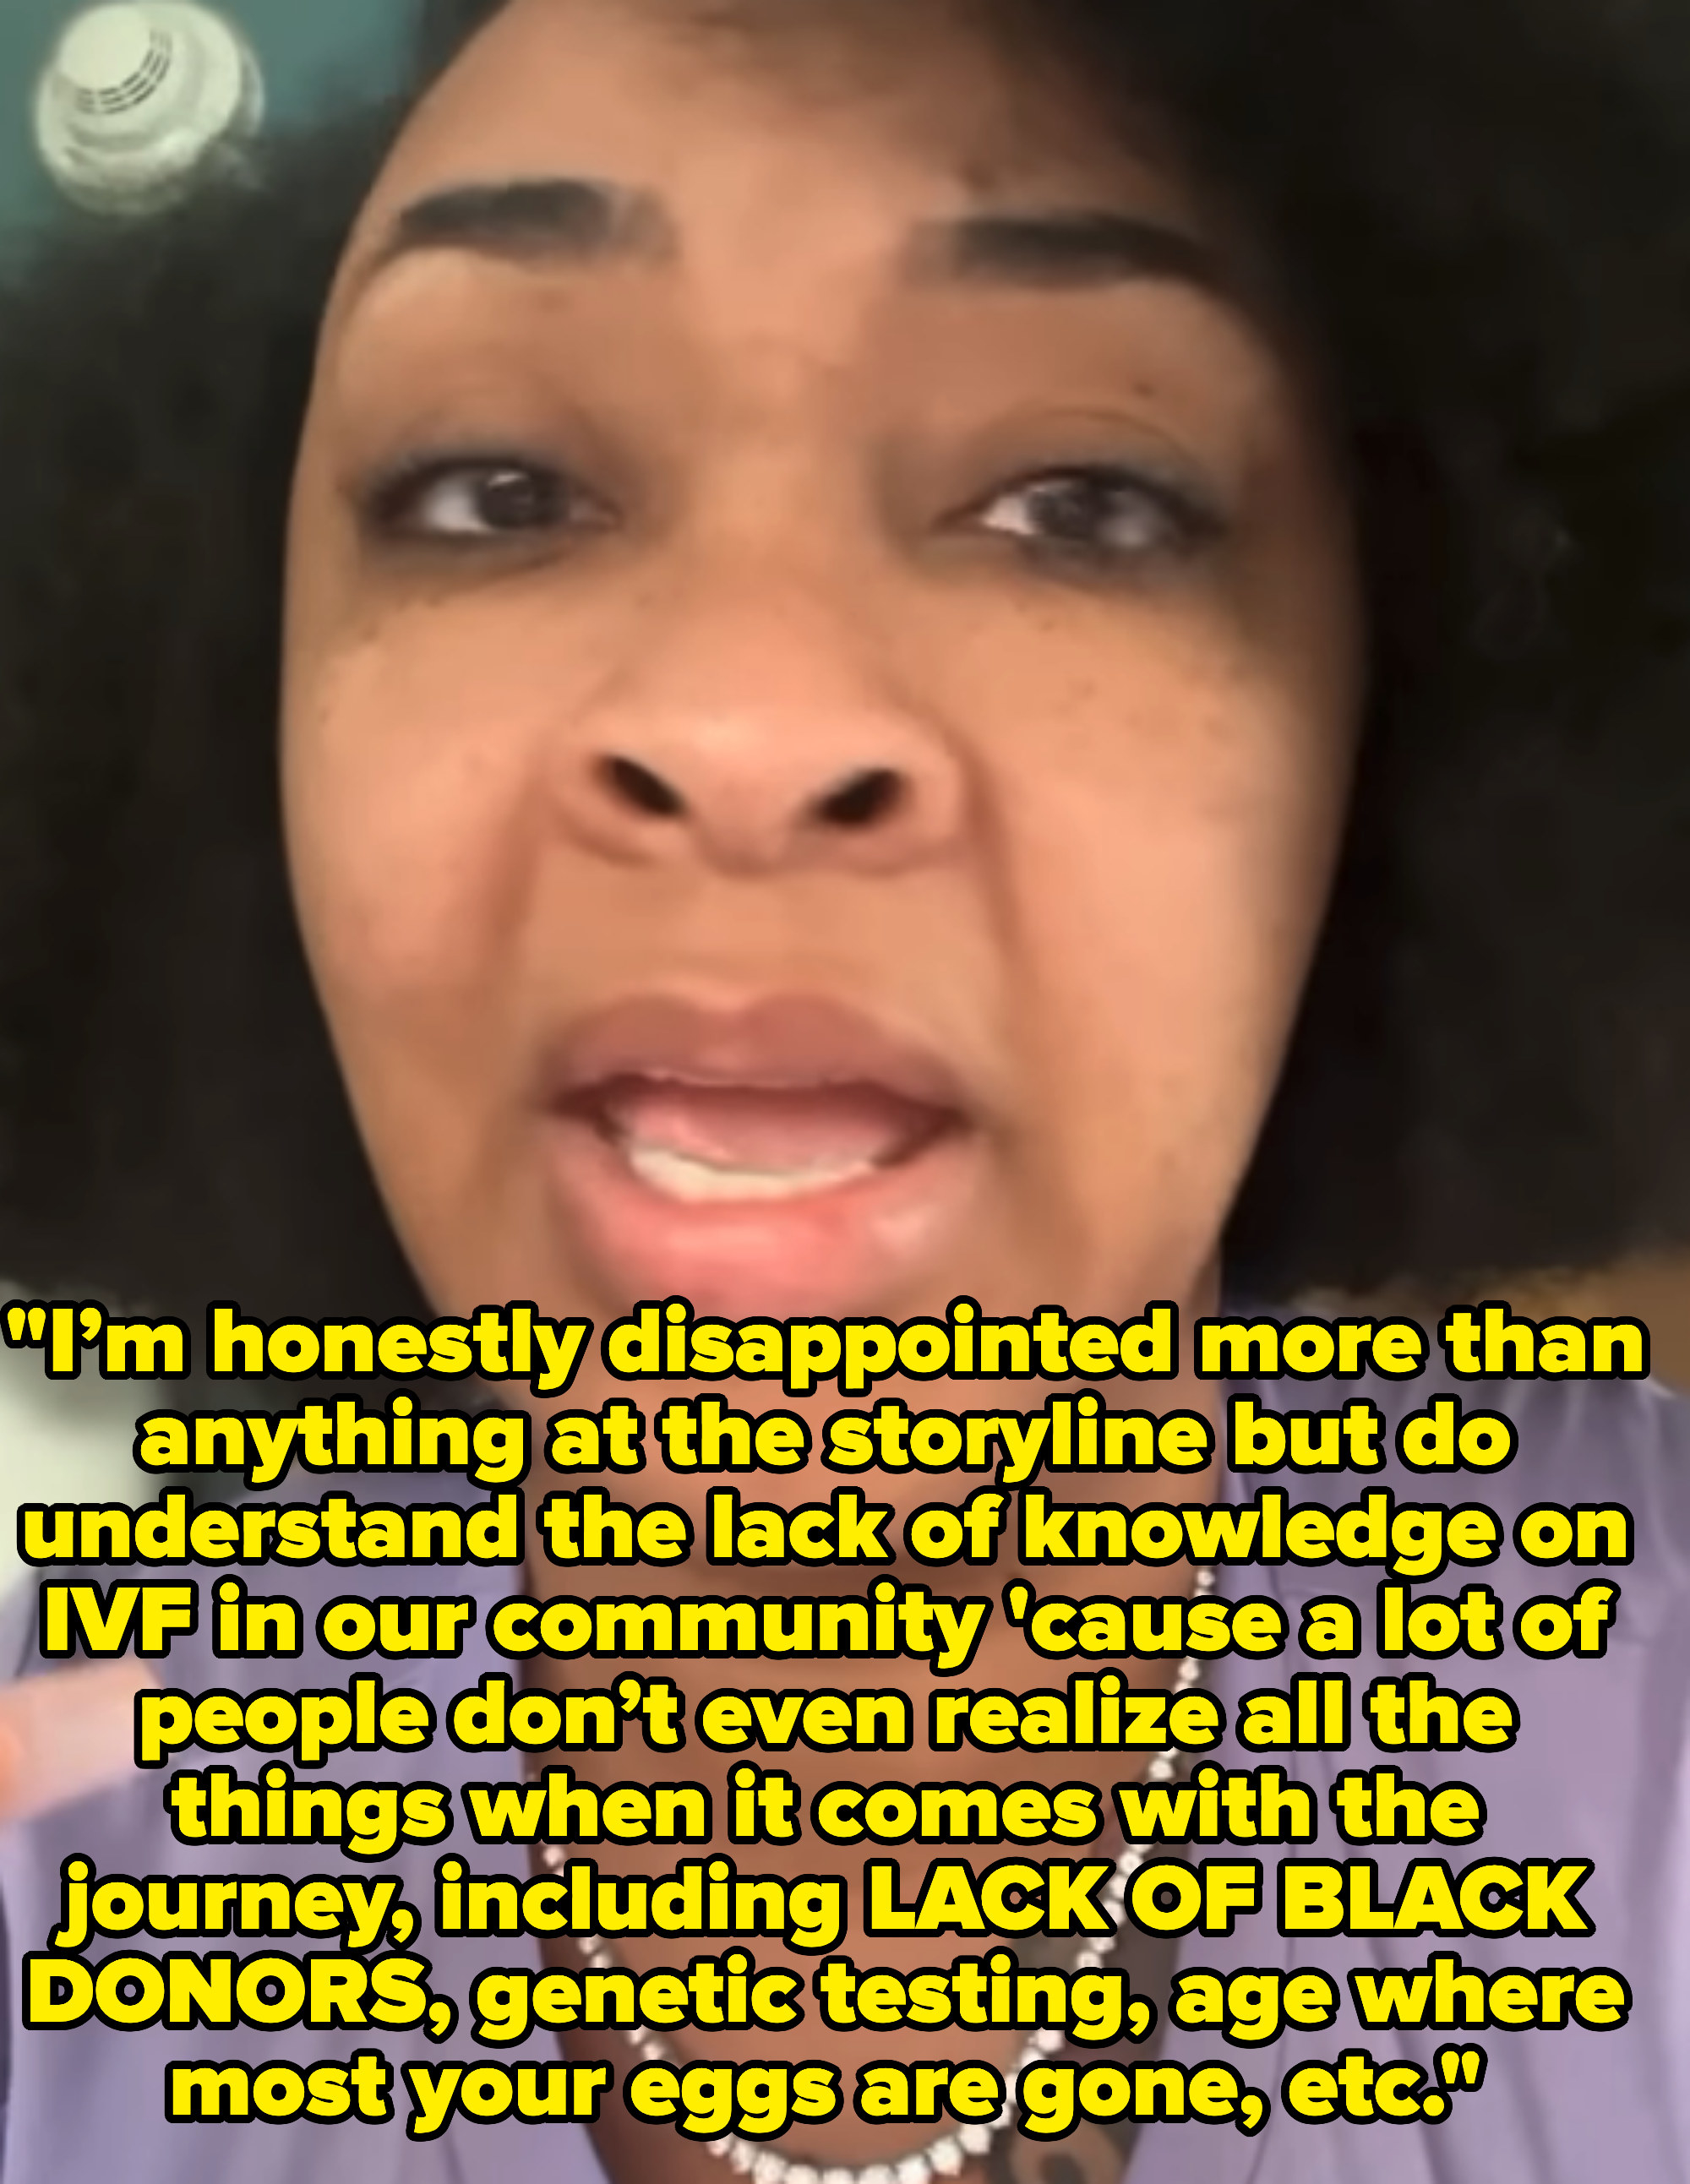 She says that there are a lot of factors in the process such as a lack of Black donors, genetic testing, and age where most your eggs are gone